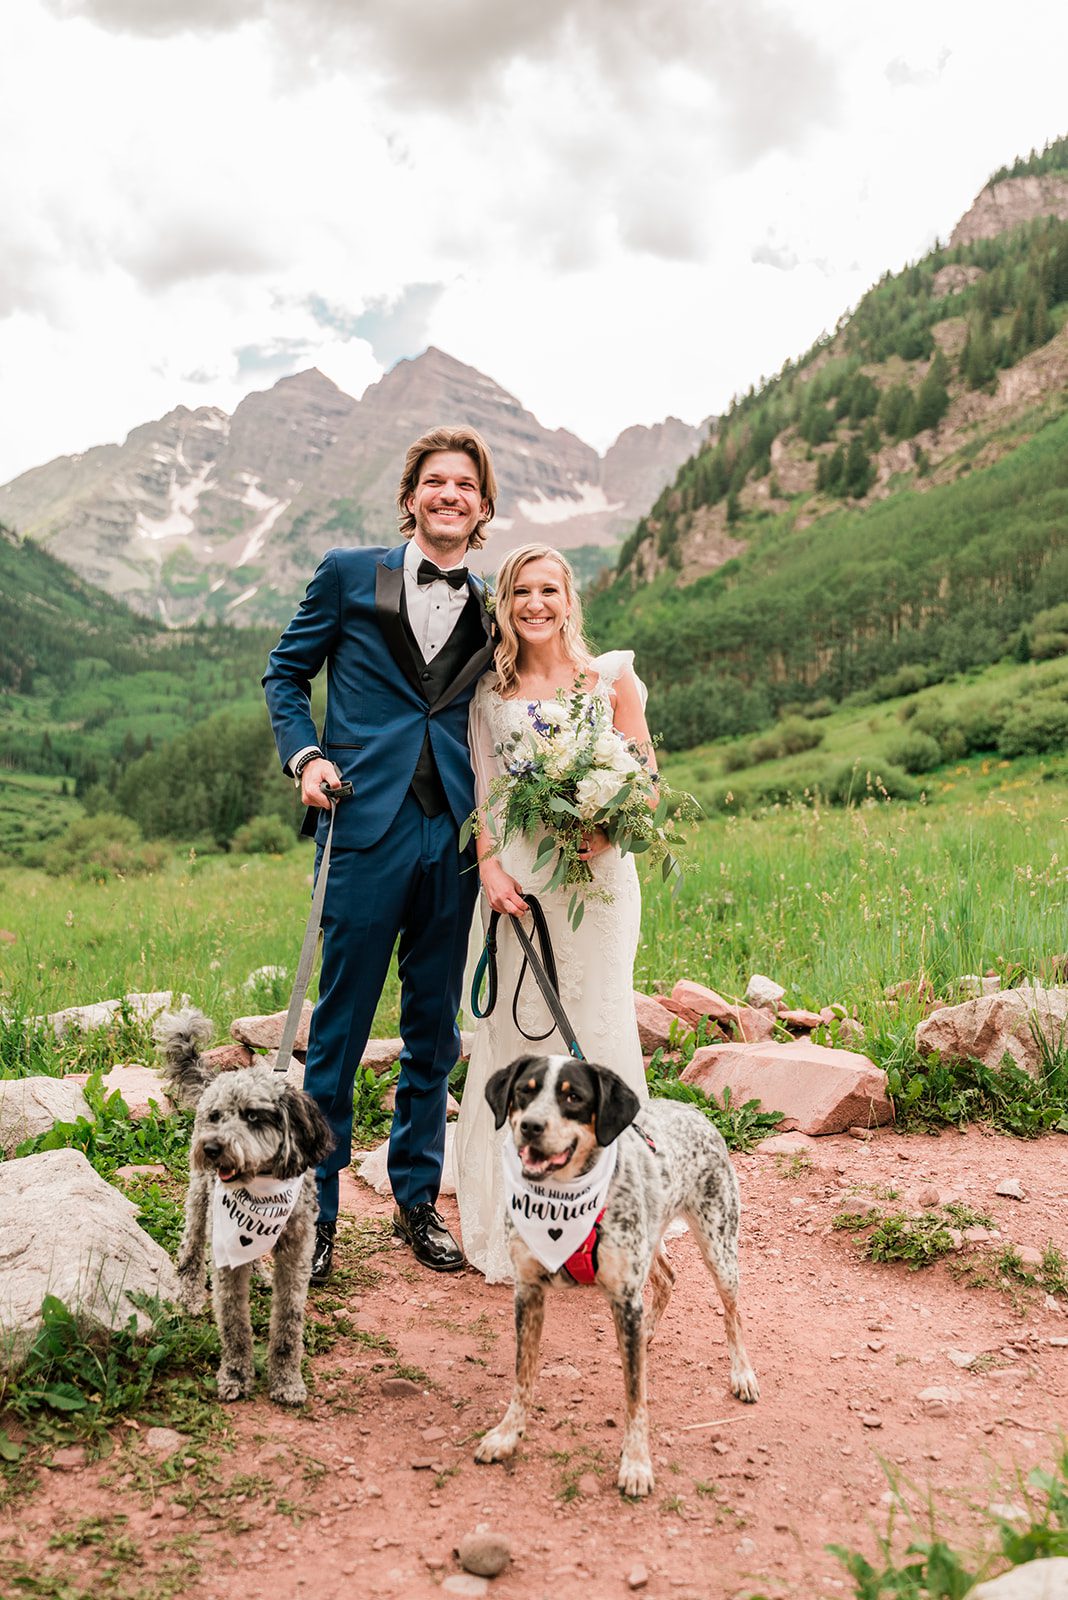 Eloping with Your Dog - The Ultimate Guide to Planning and Elopement with a Dog